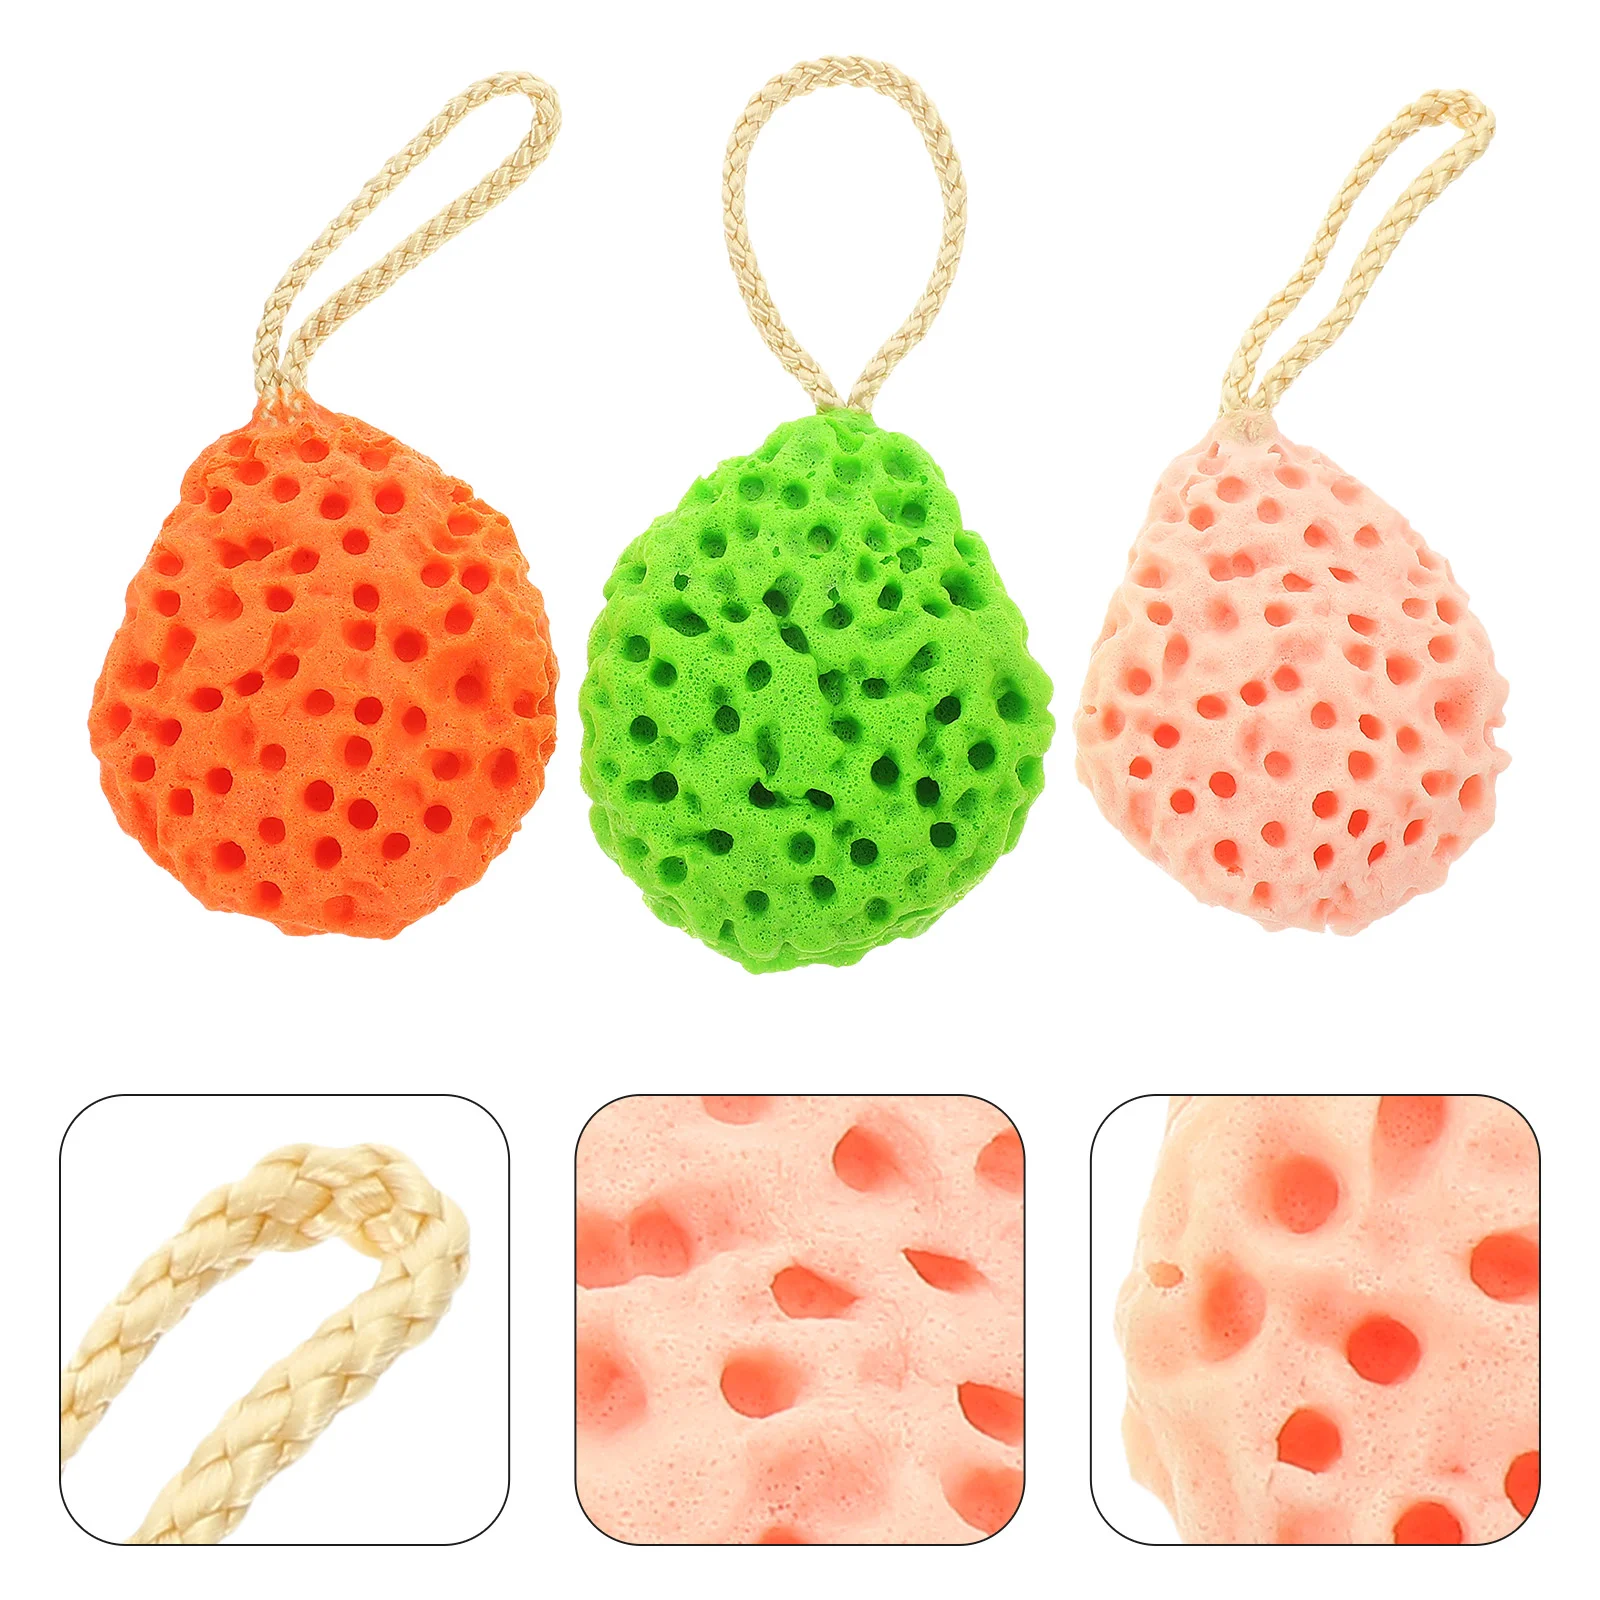 

3 Pcs Compressed Facial Sponges Face Washing Supplies Bath Makeup Supple Exfoliating Girl Cleaner Travel Honeycomb